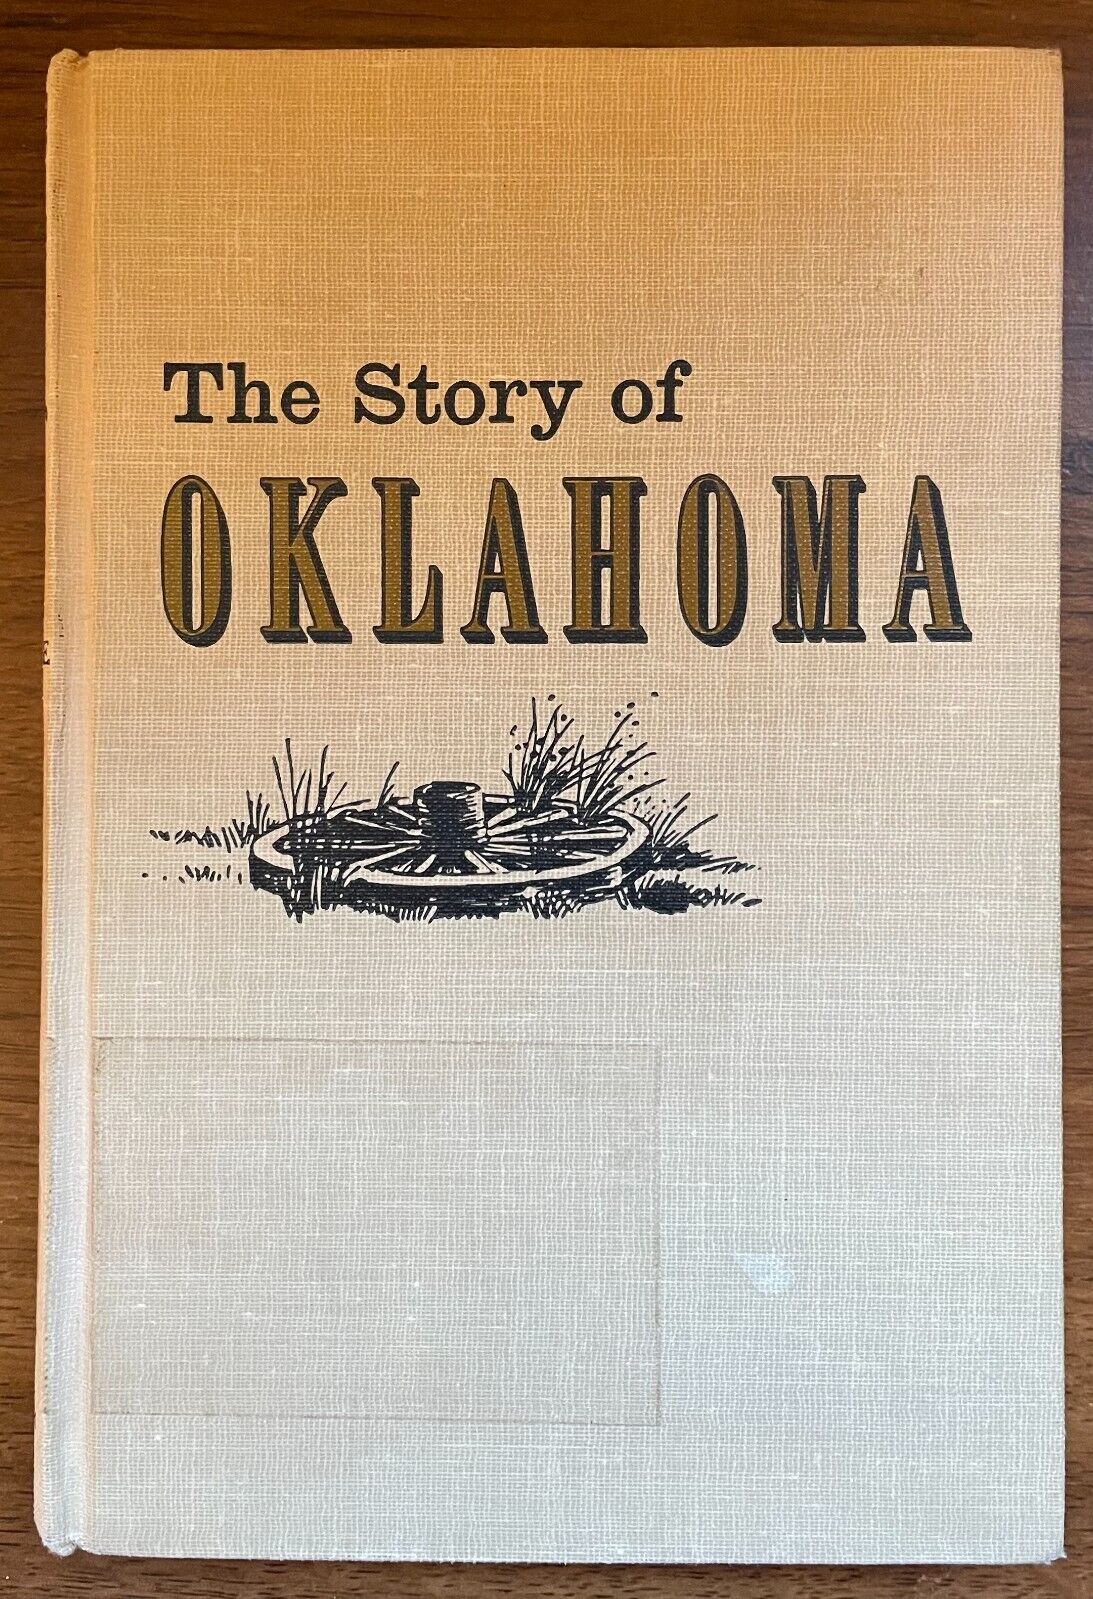 THE STORY OF OKLAHOMA-NATIVE AMERICANS-LON TINKLE-EARLY SETTLERS-1ST ED X-LIB HB